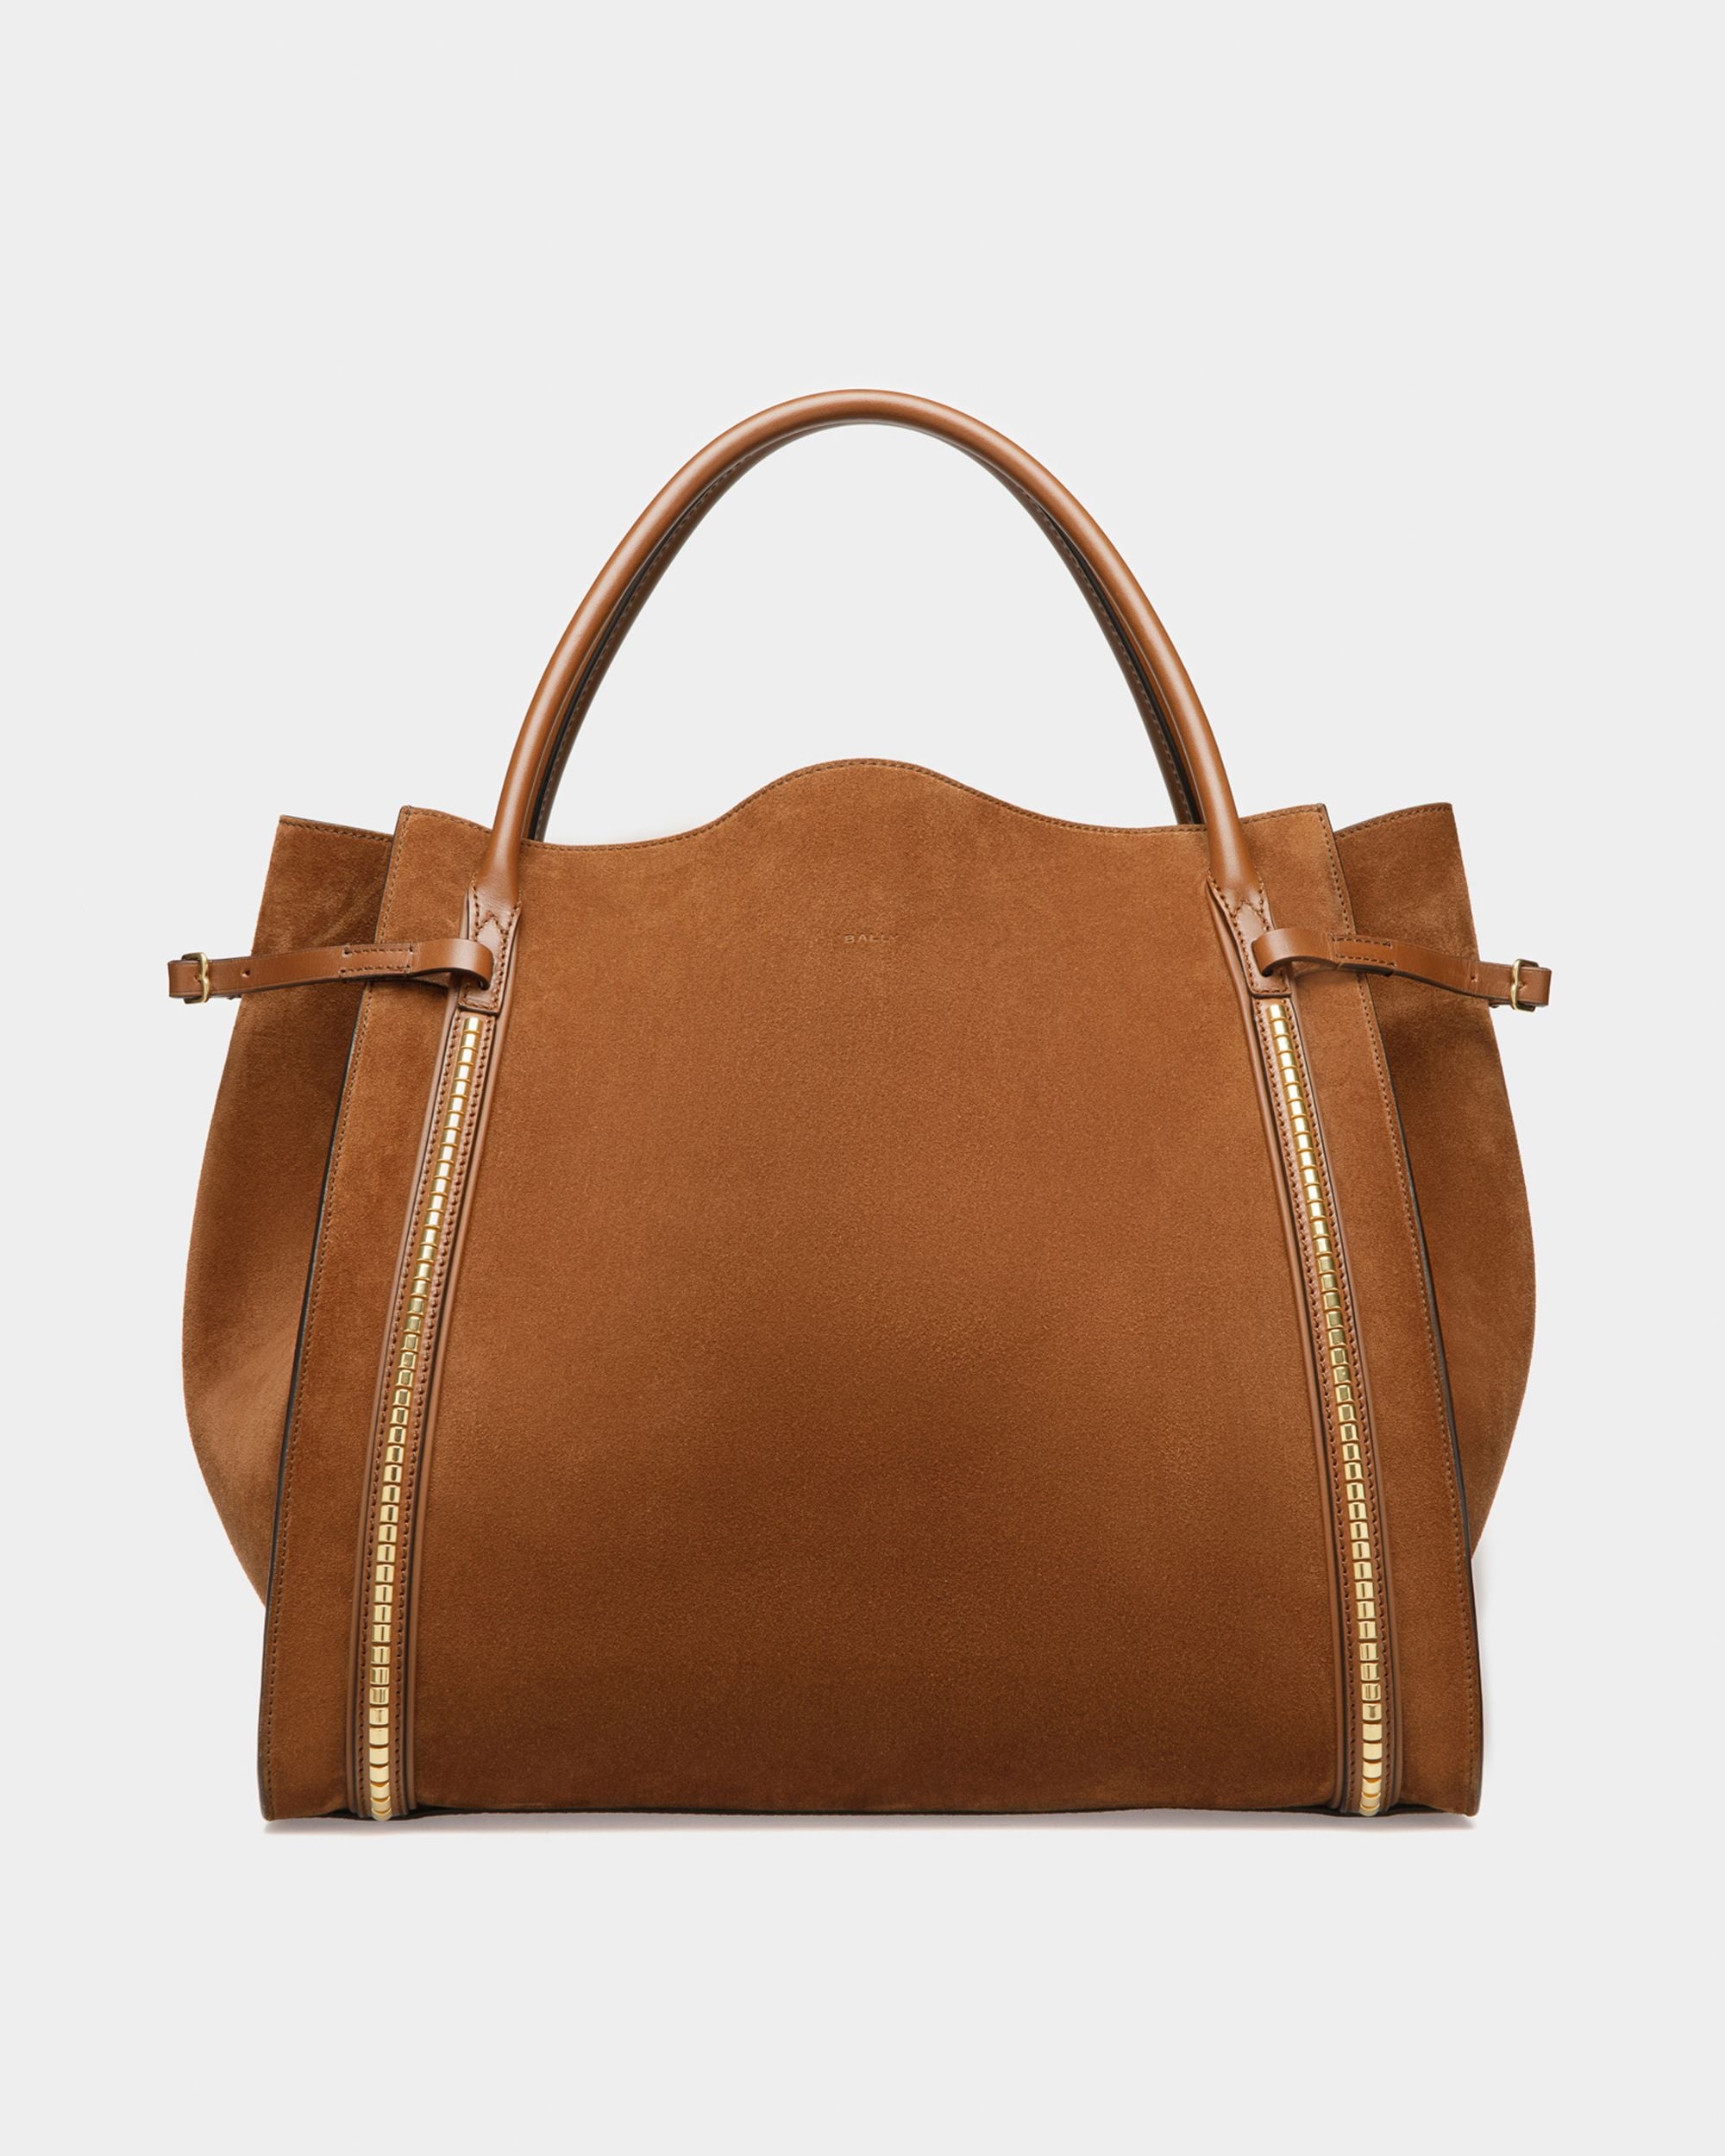 Chesney Extra Large Tote Bag | Women's Tote | Brown Suede Leather | Bally | Still Life Front